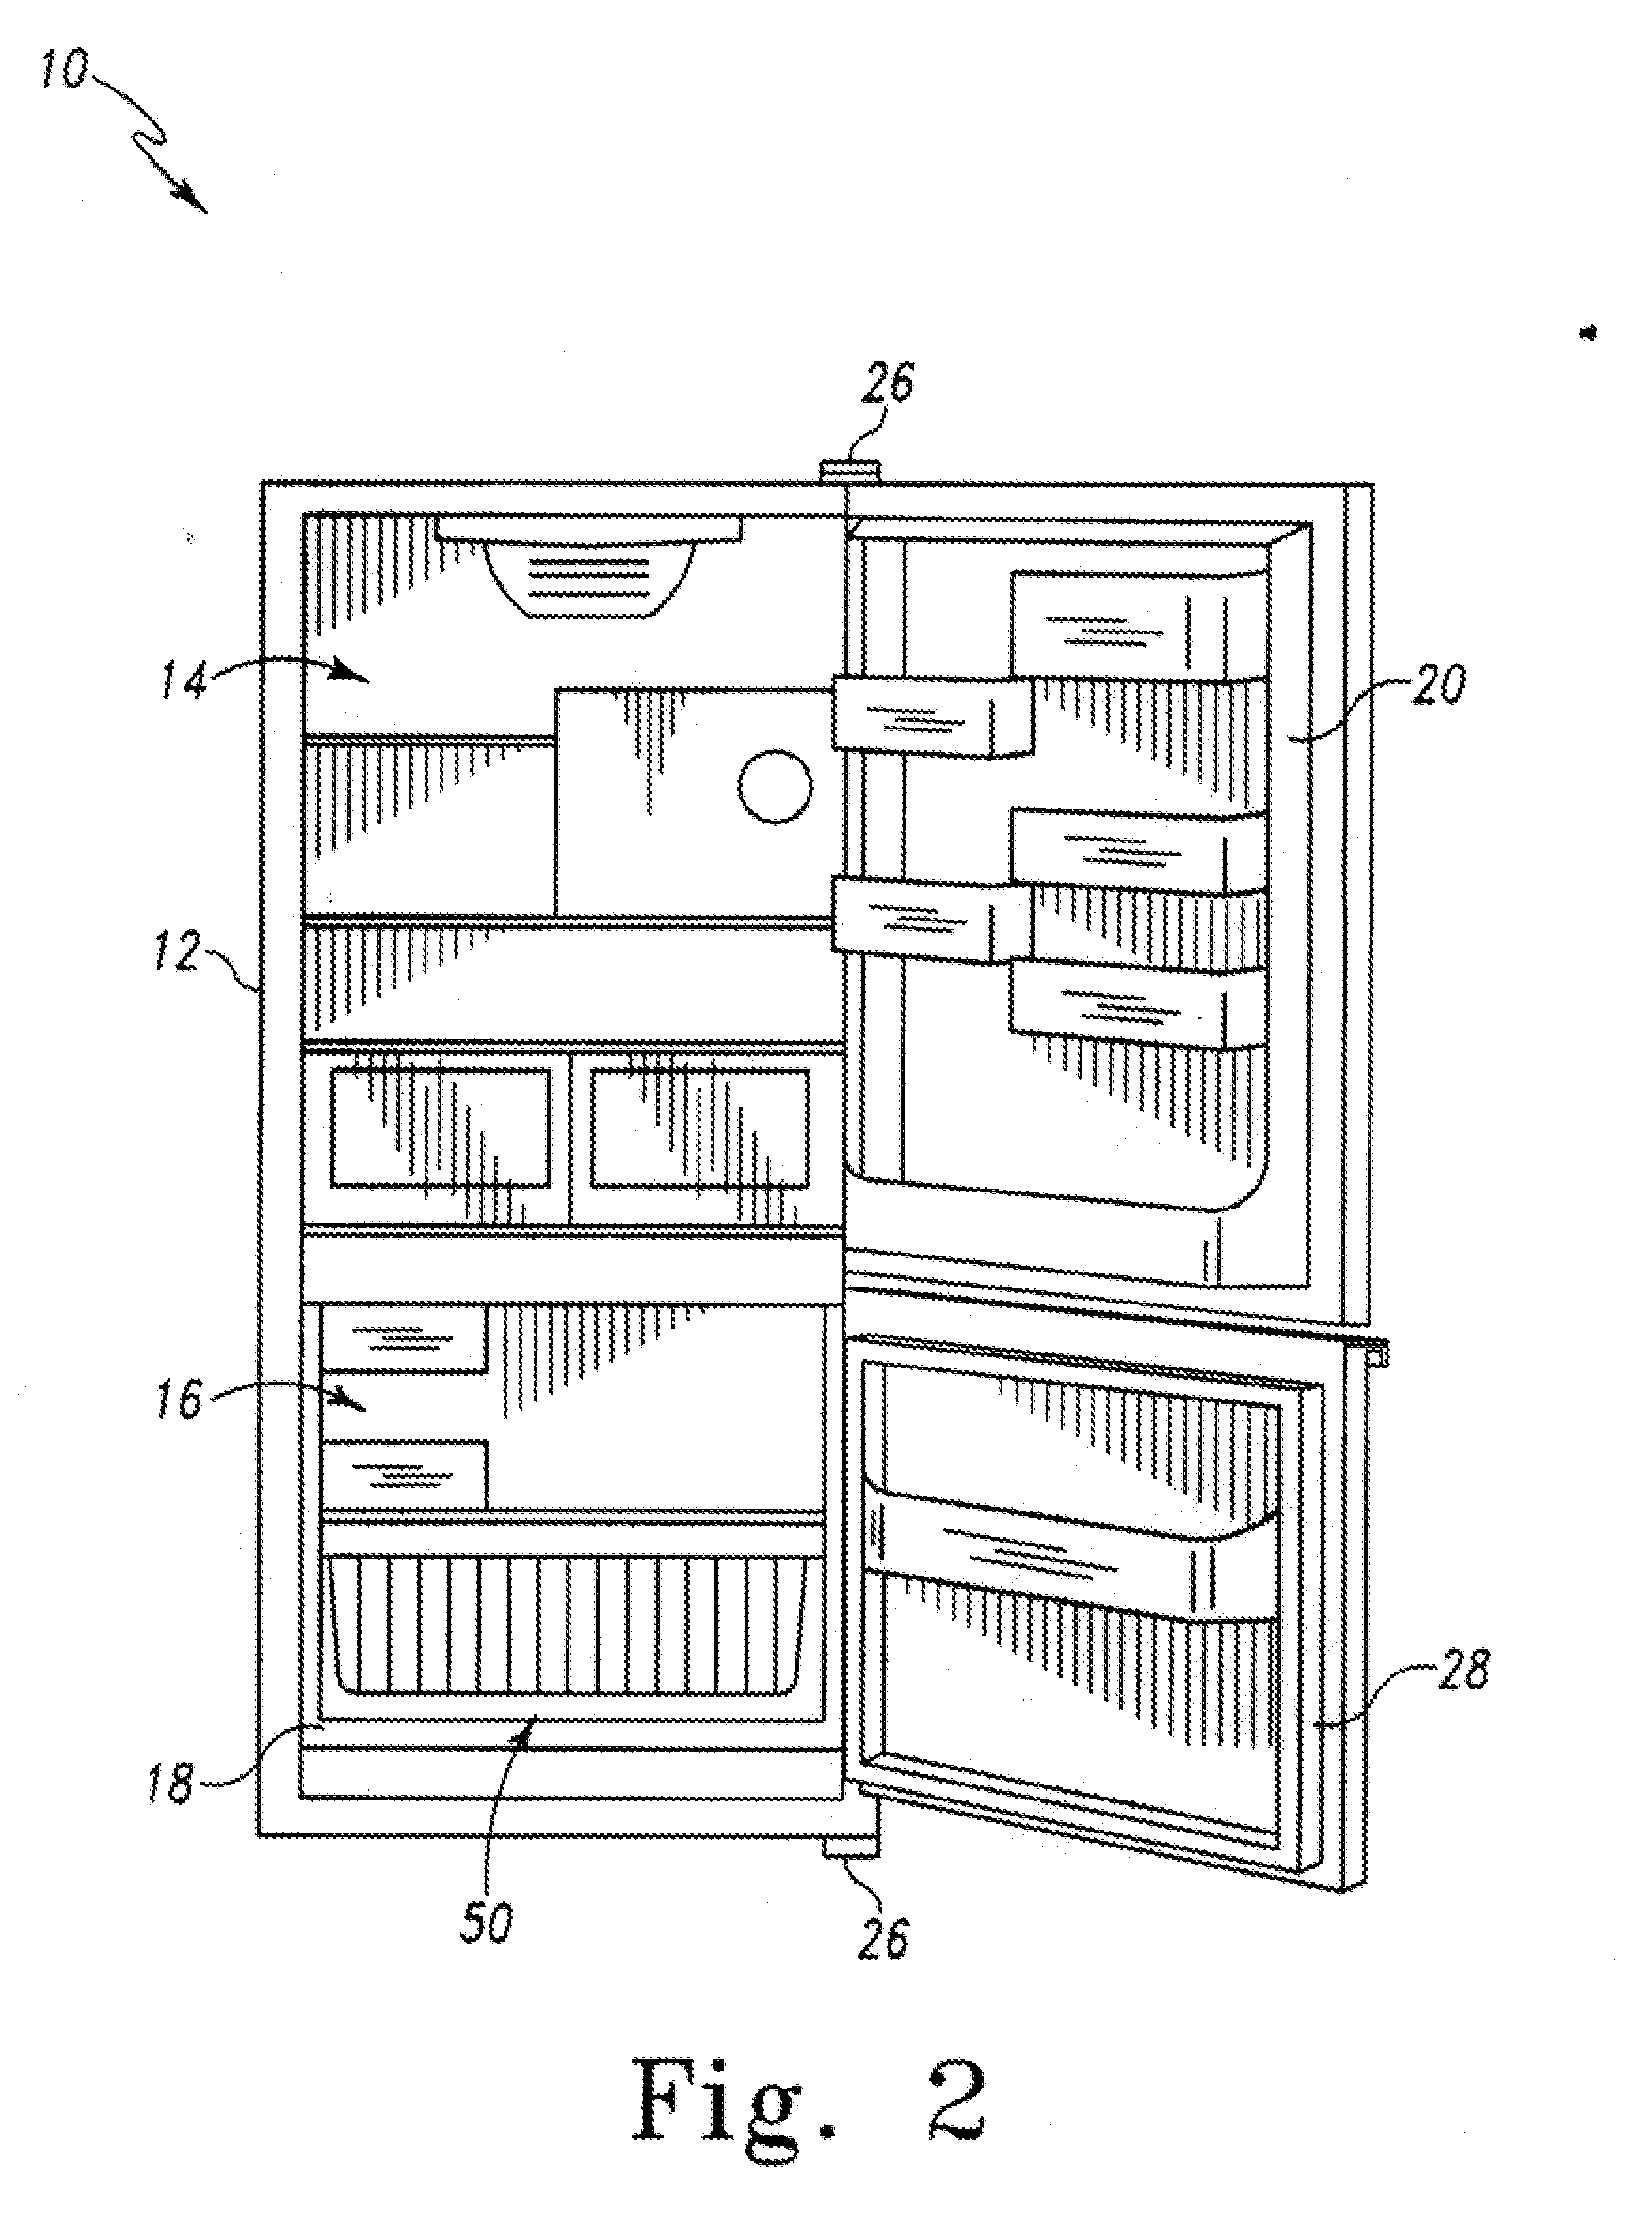 Rack and pinion stabilizer system